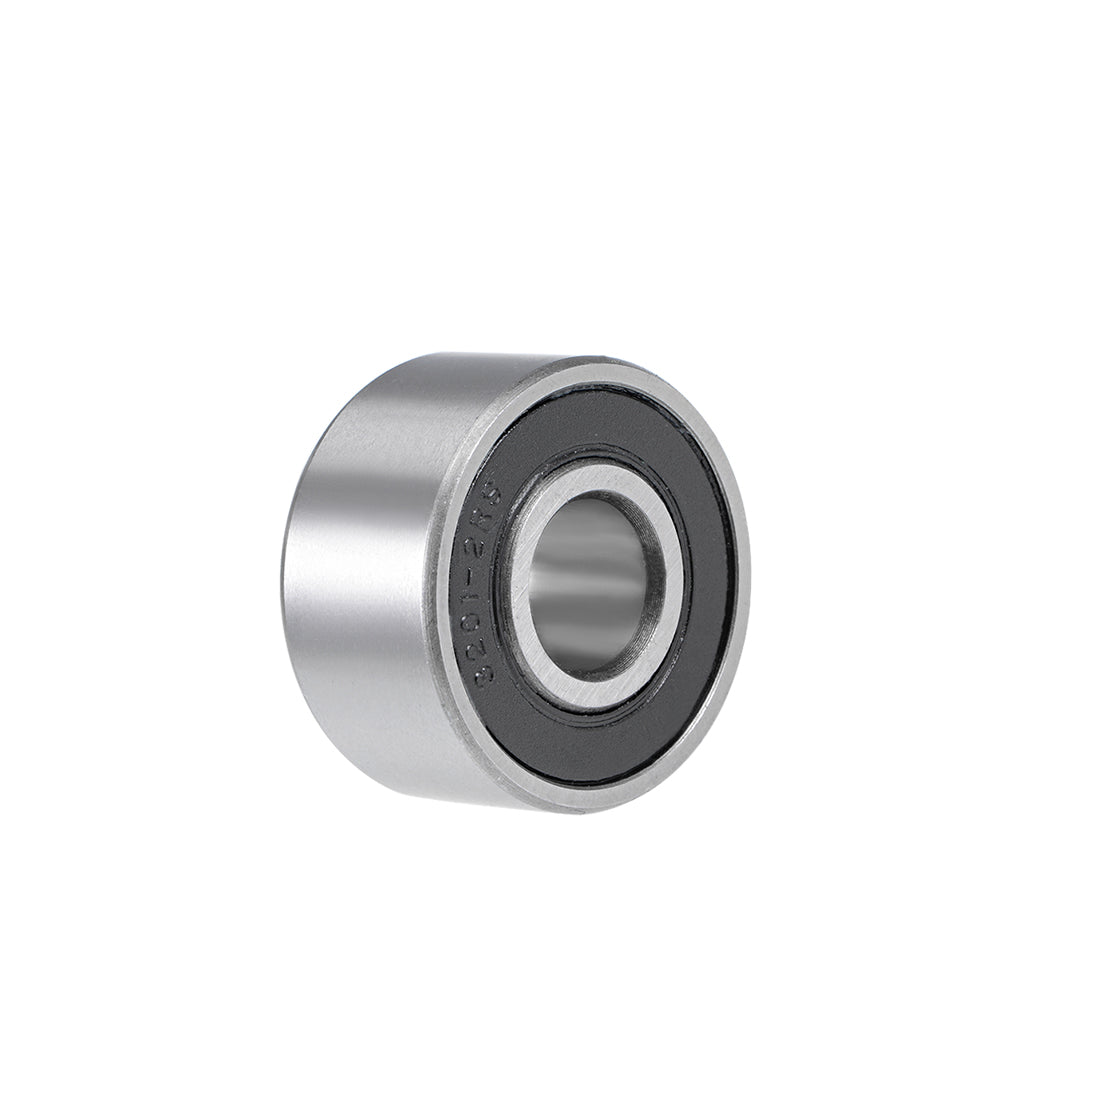 Uxcell Uxcell 5201-2RS Angular Contact Ball Bearing 12x32x15.9mm Sealed Bearings 3201-2RS 2pcs